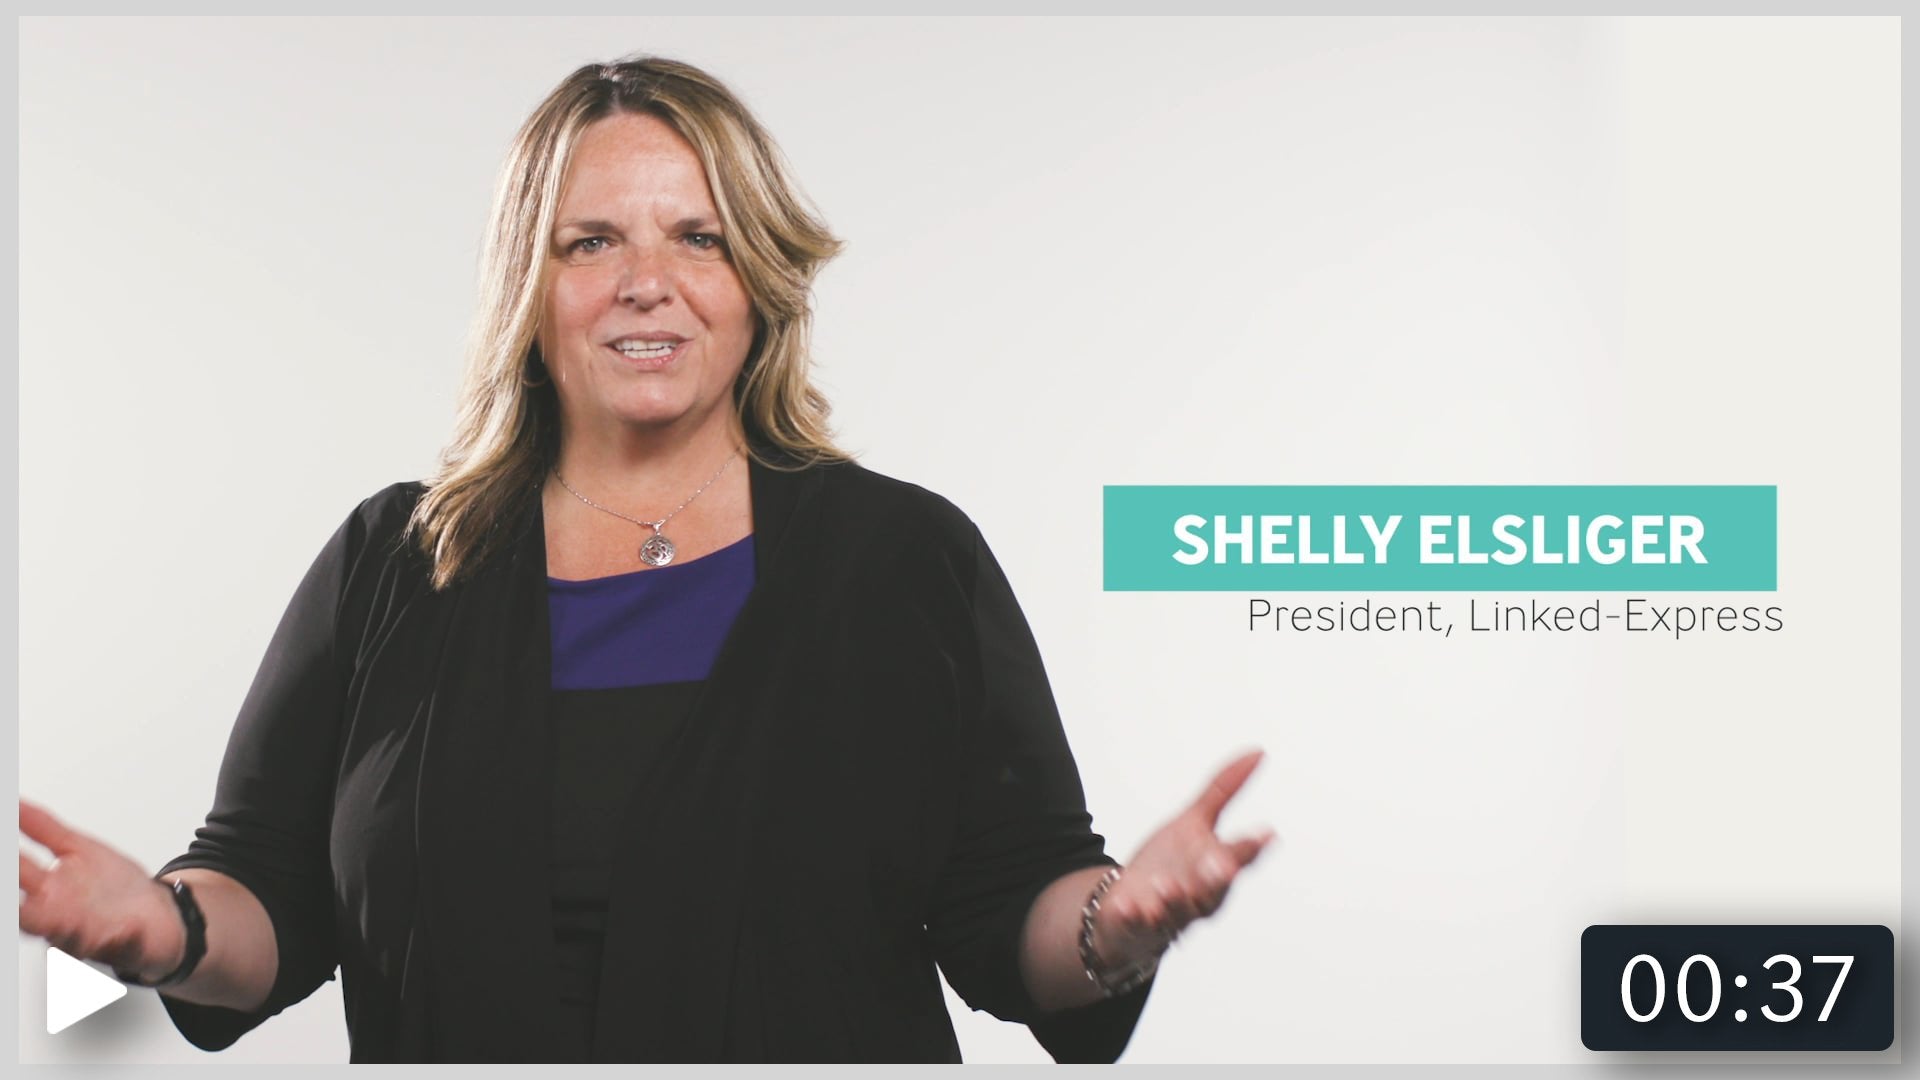 Meet Shelly Elsliger who shares LinkedIn best practices to help you stand out online